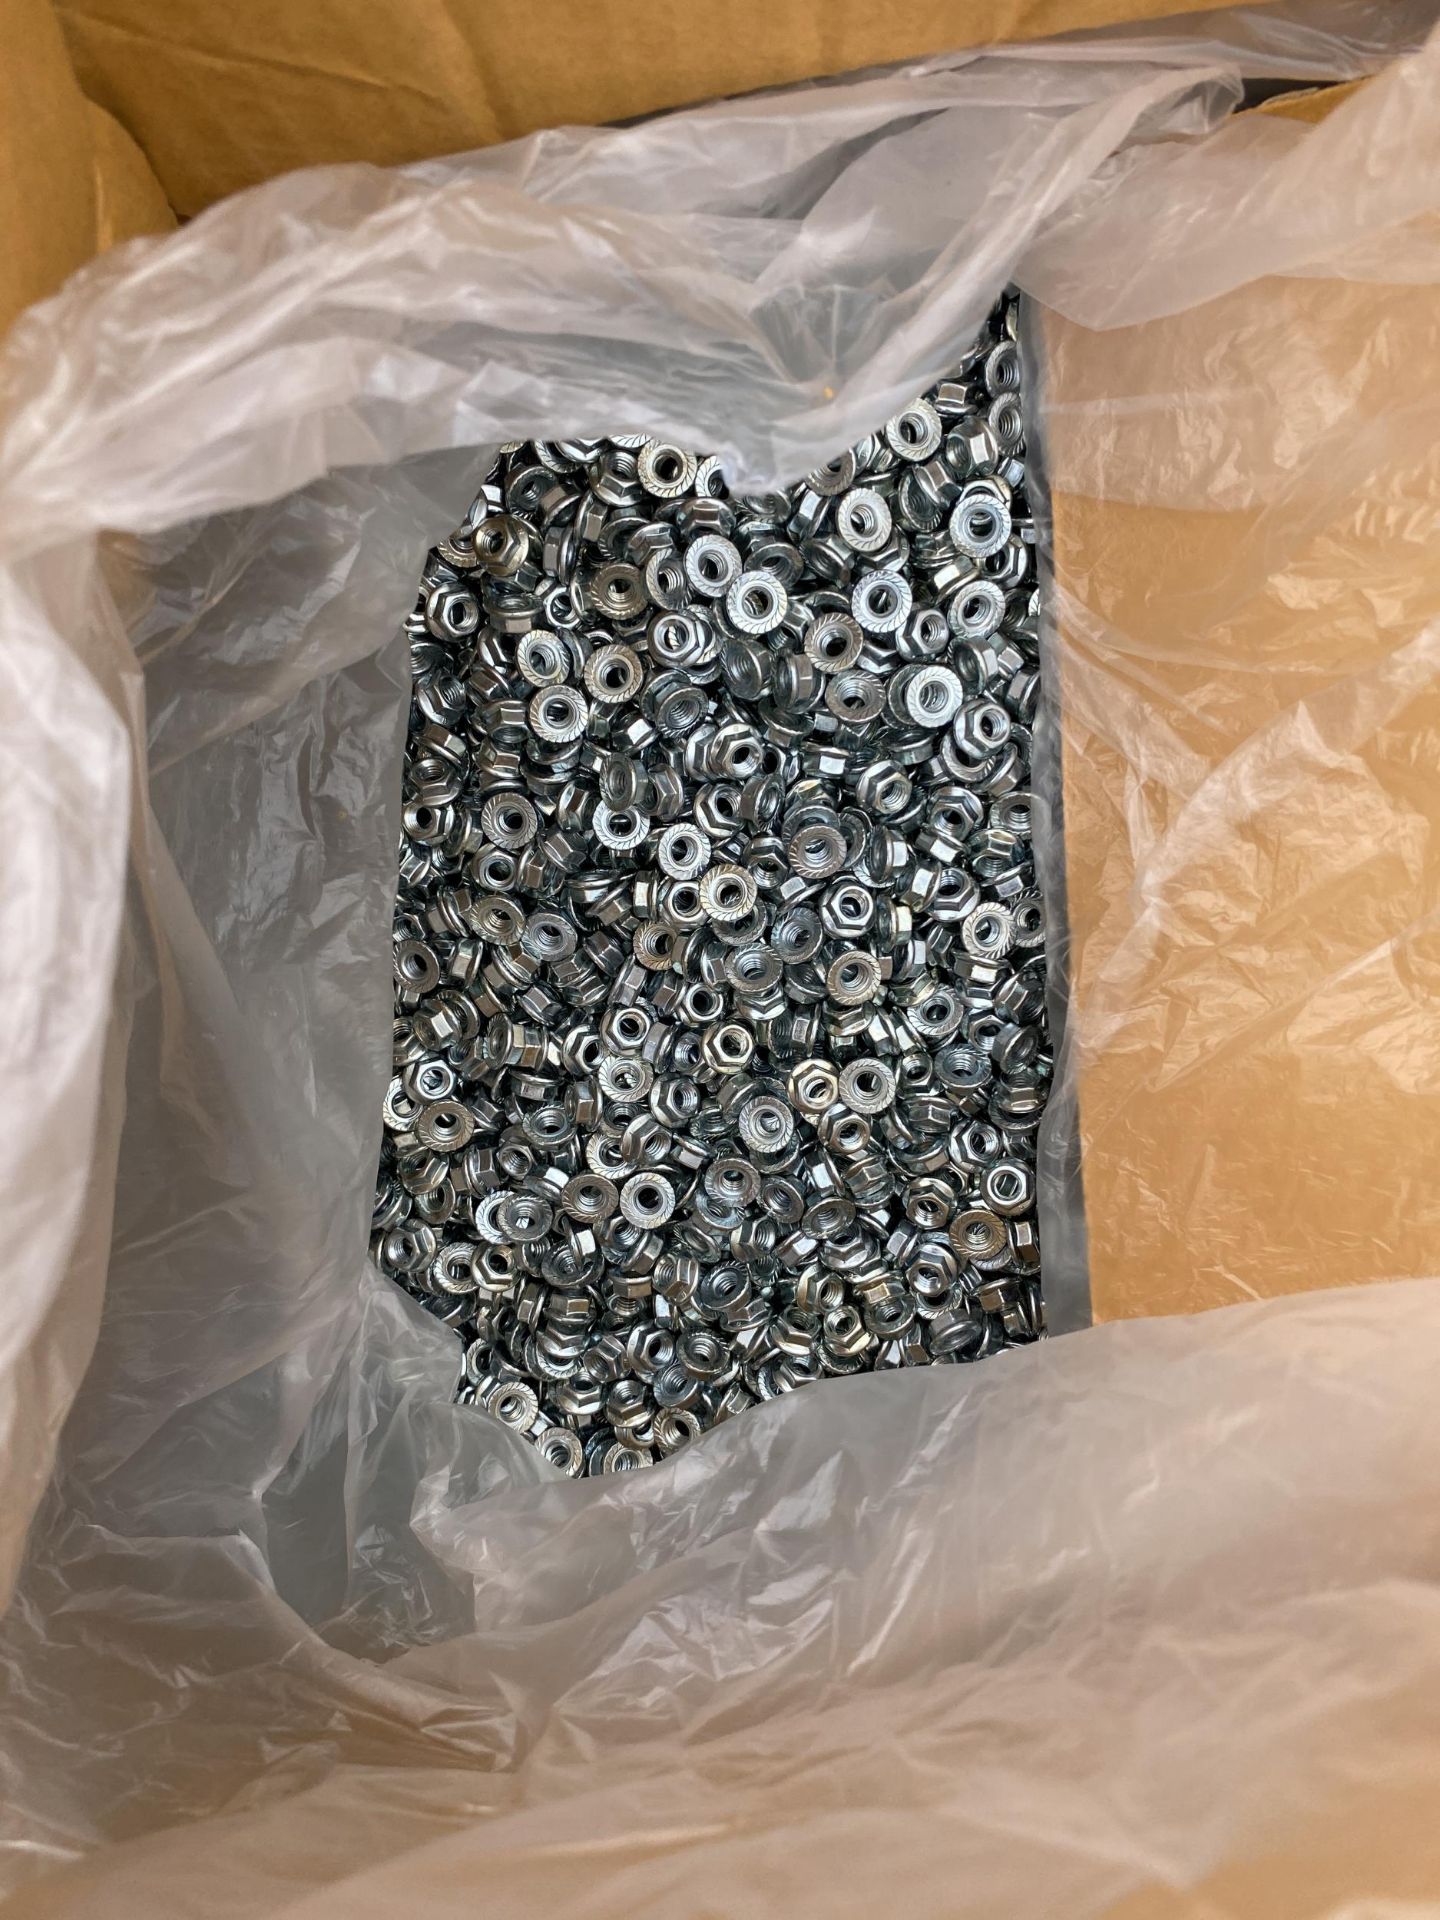 A LARGE QUANTITY OF WASHERS - Image 2 of 3